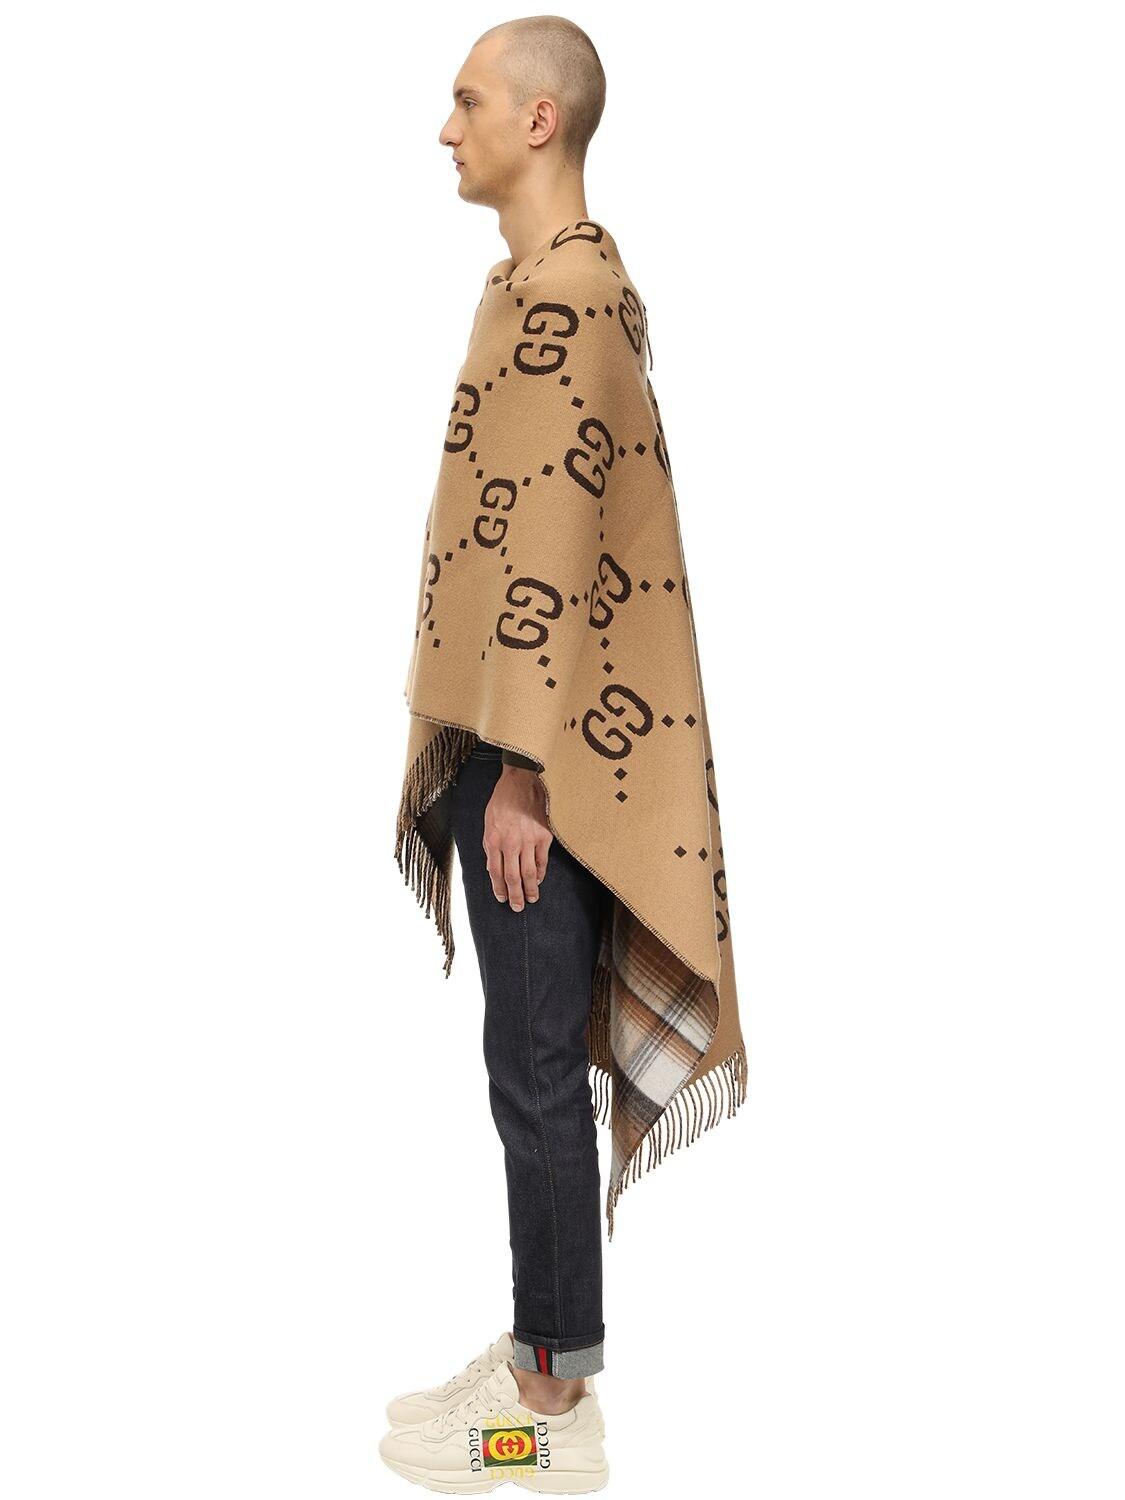 Gucci Logo Poncho in Beige/Brown (Brown) for Men - Lyst